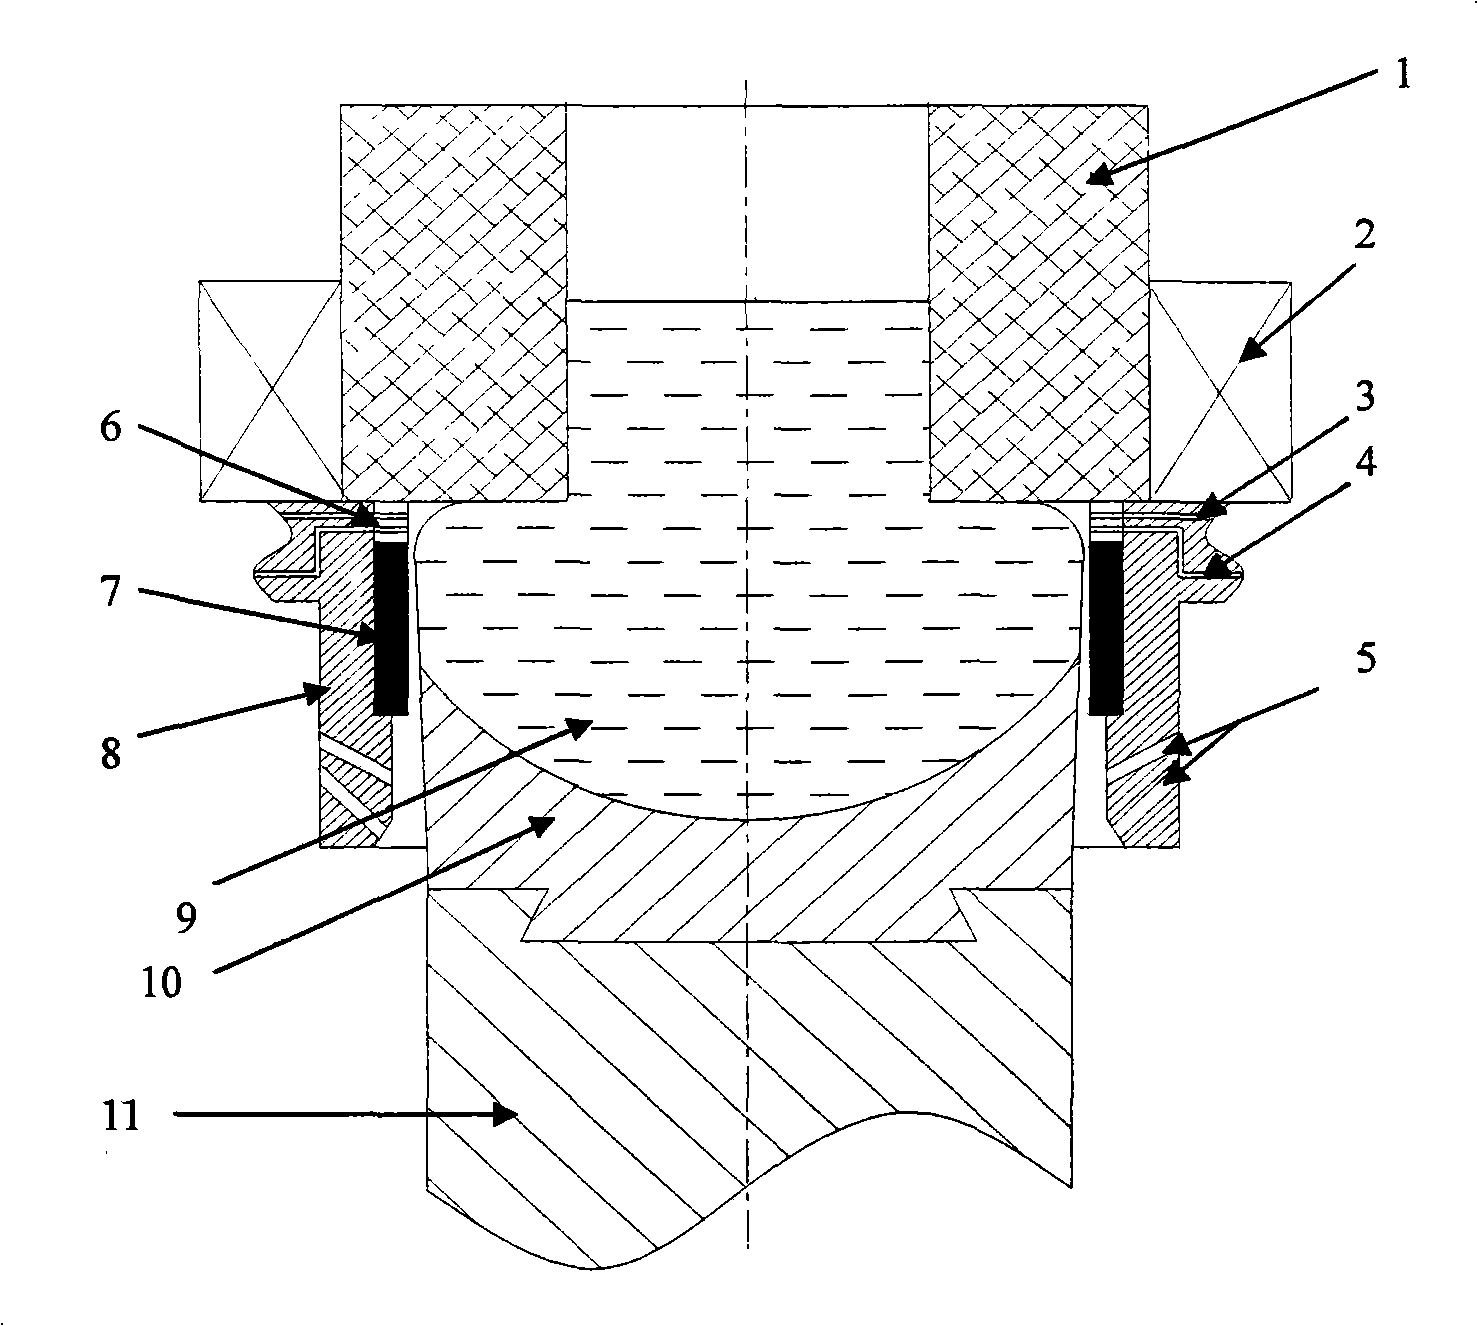 Gas film quick continuous casting device and method in magnetostatic field